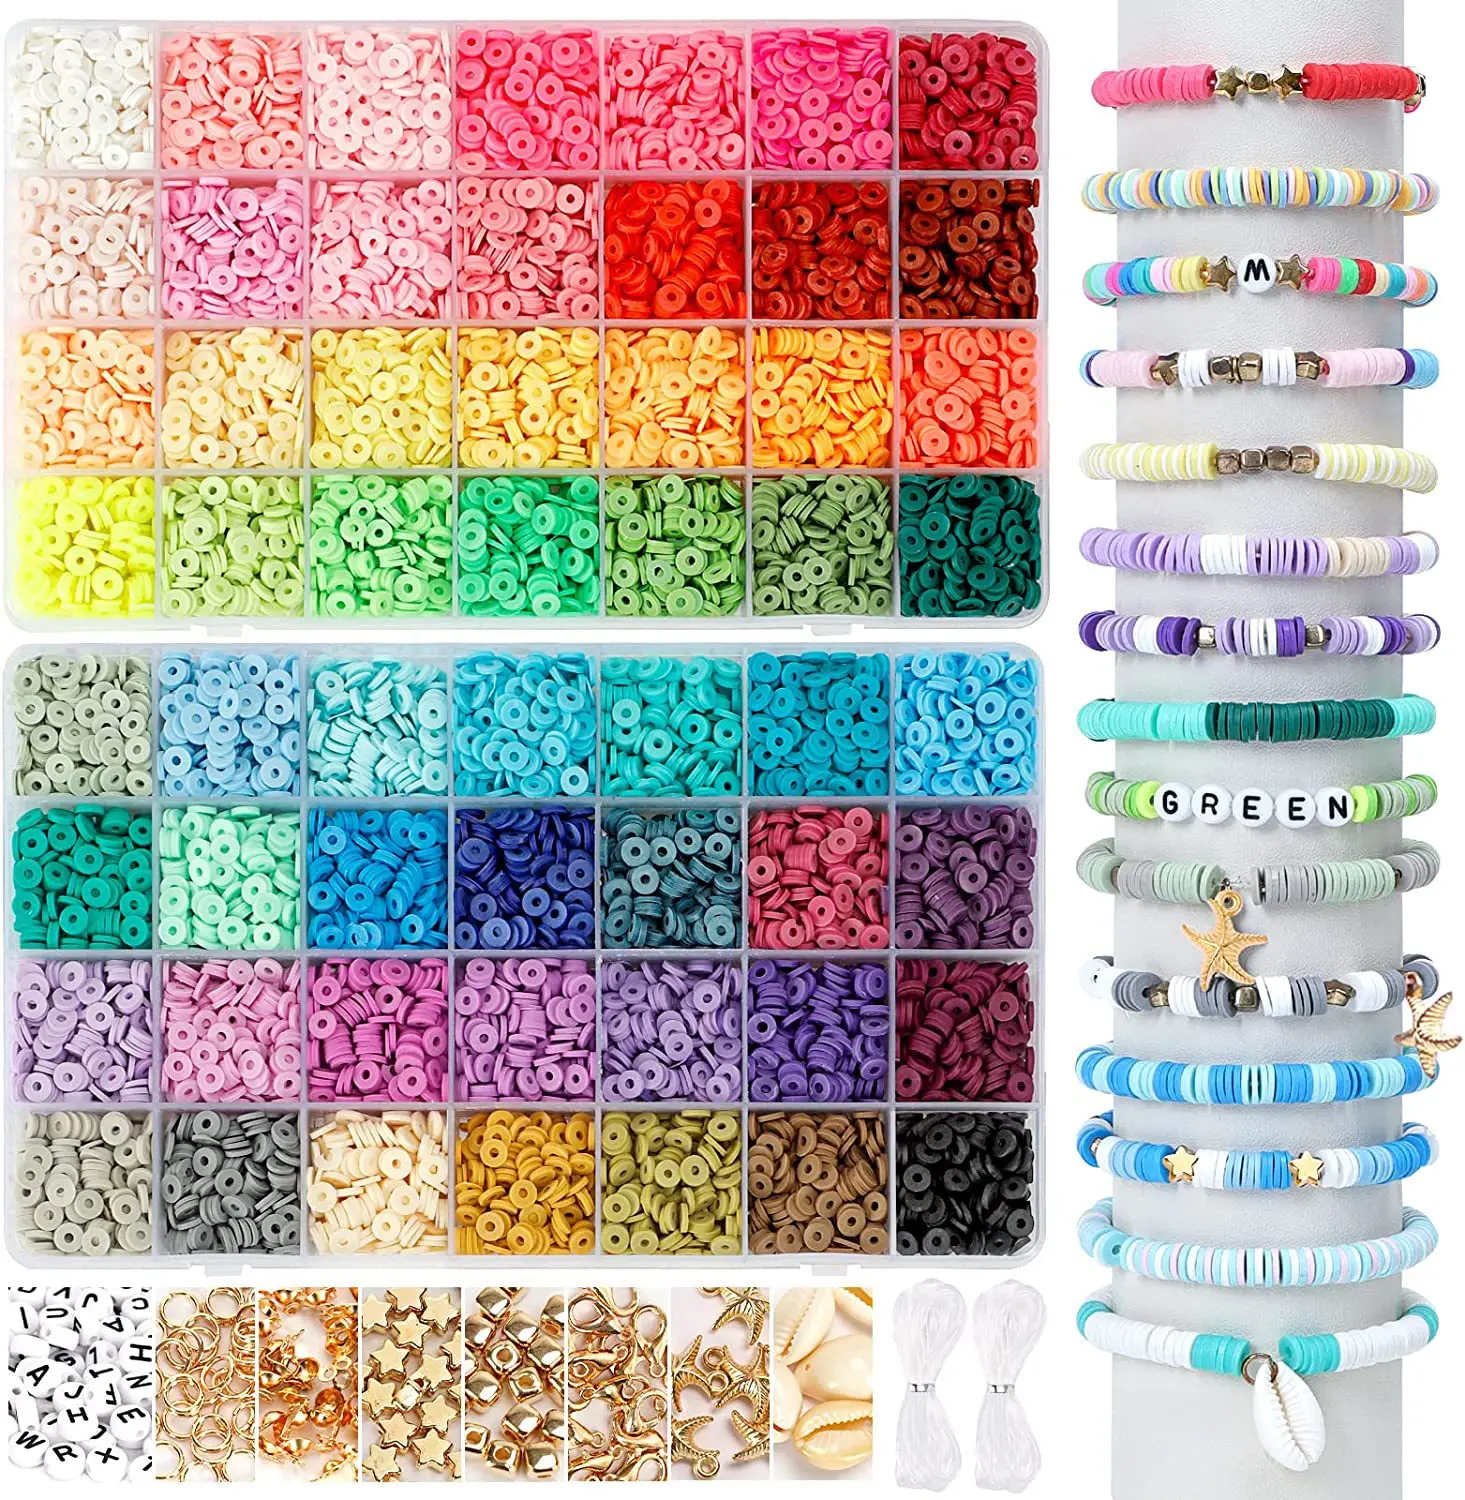 

JC Hot Sale Clay Beads for Jewelry Making Kit Flat Round Polymer Clay Beads DIY Handmade Accessories